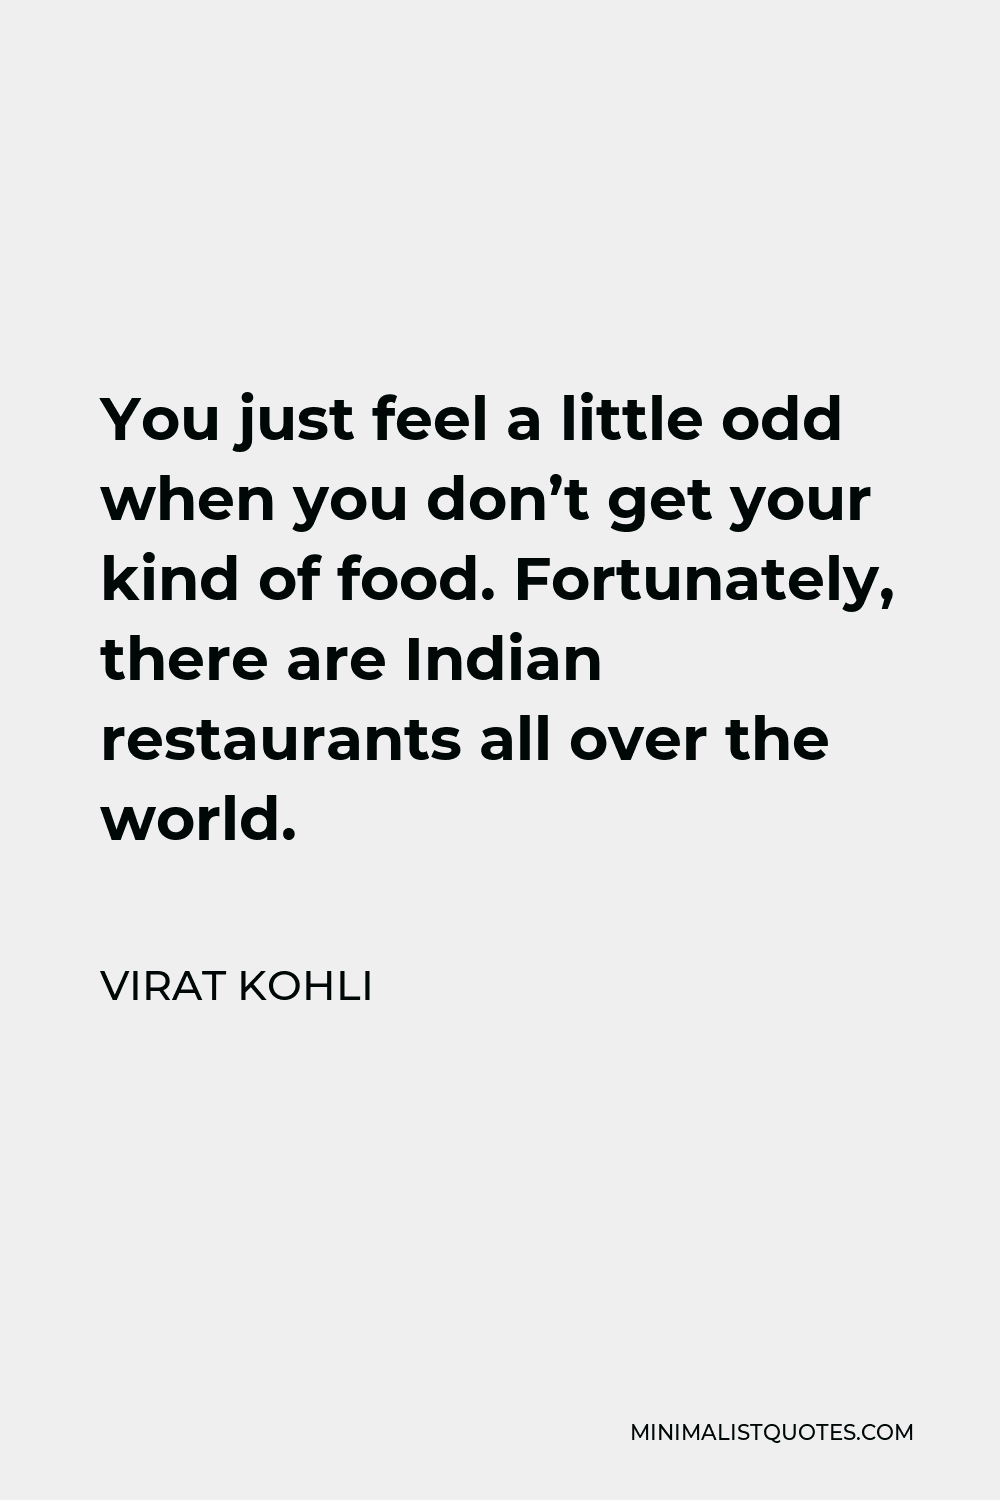 Virat Kohli Quote - You just feel a little odd when you don’t get your kind of food. Fortunately, there are Indian restaurants all over the world.